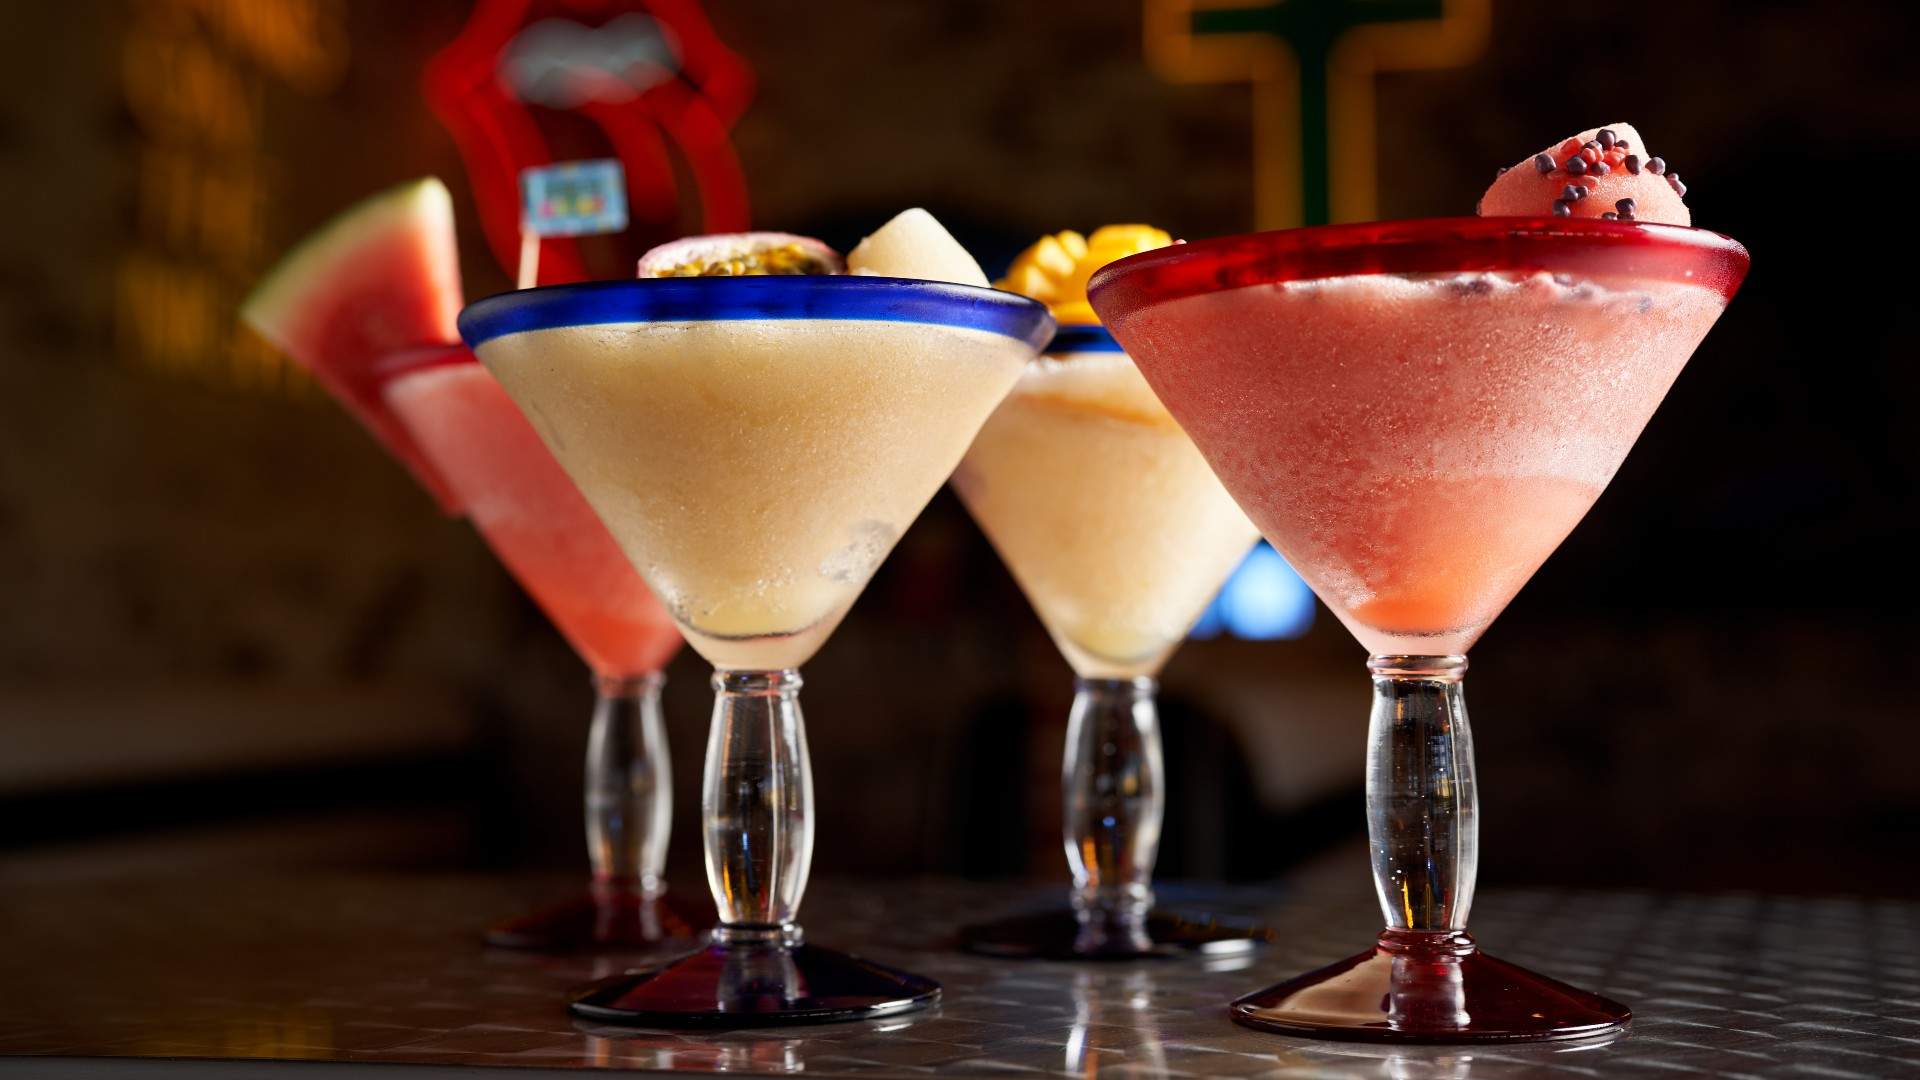 El Camino Cantina Is Queenstown's Brand New Mexican Restaurant with a Sizzling Margarita Menu